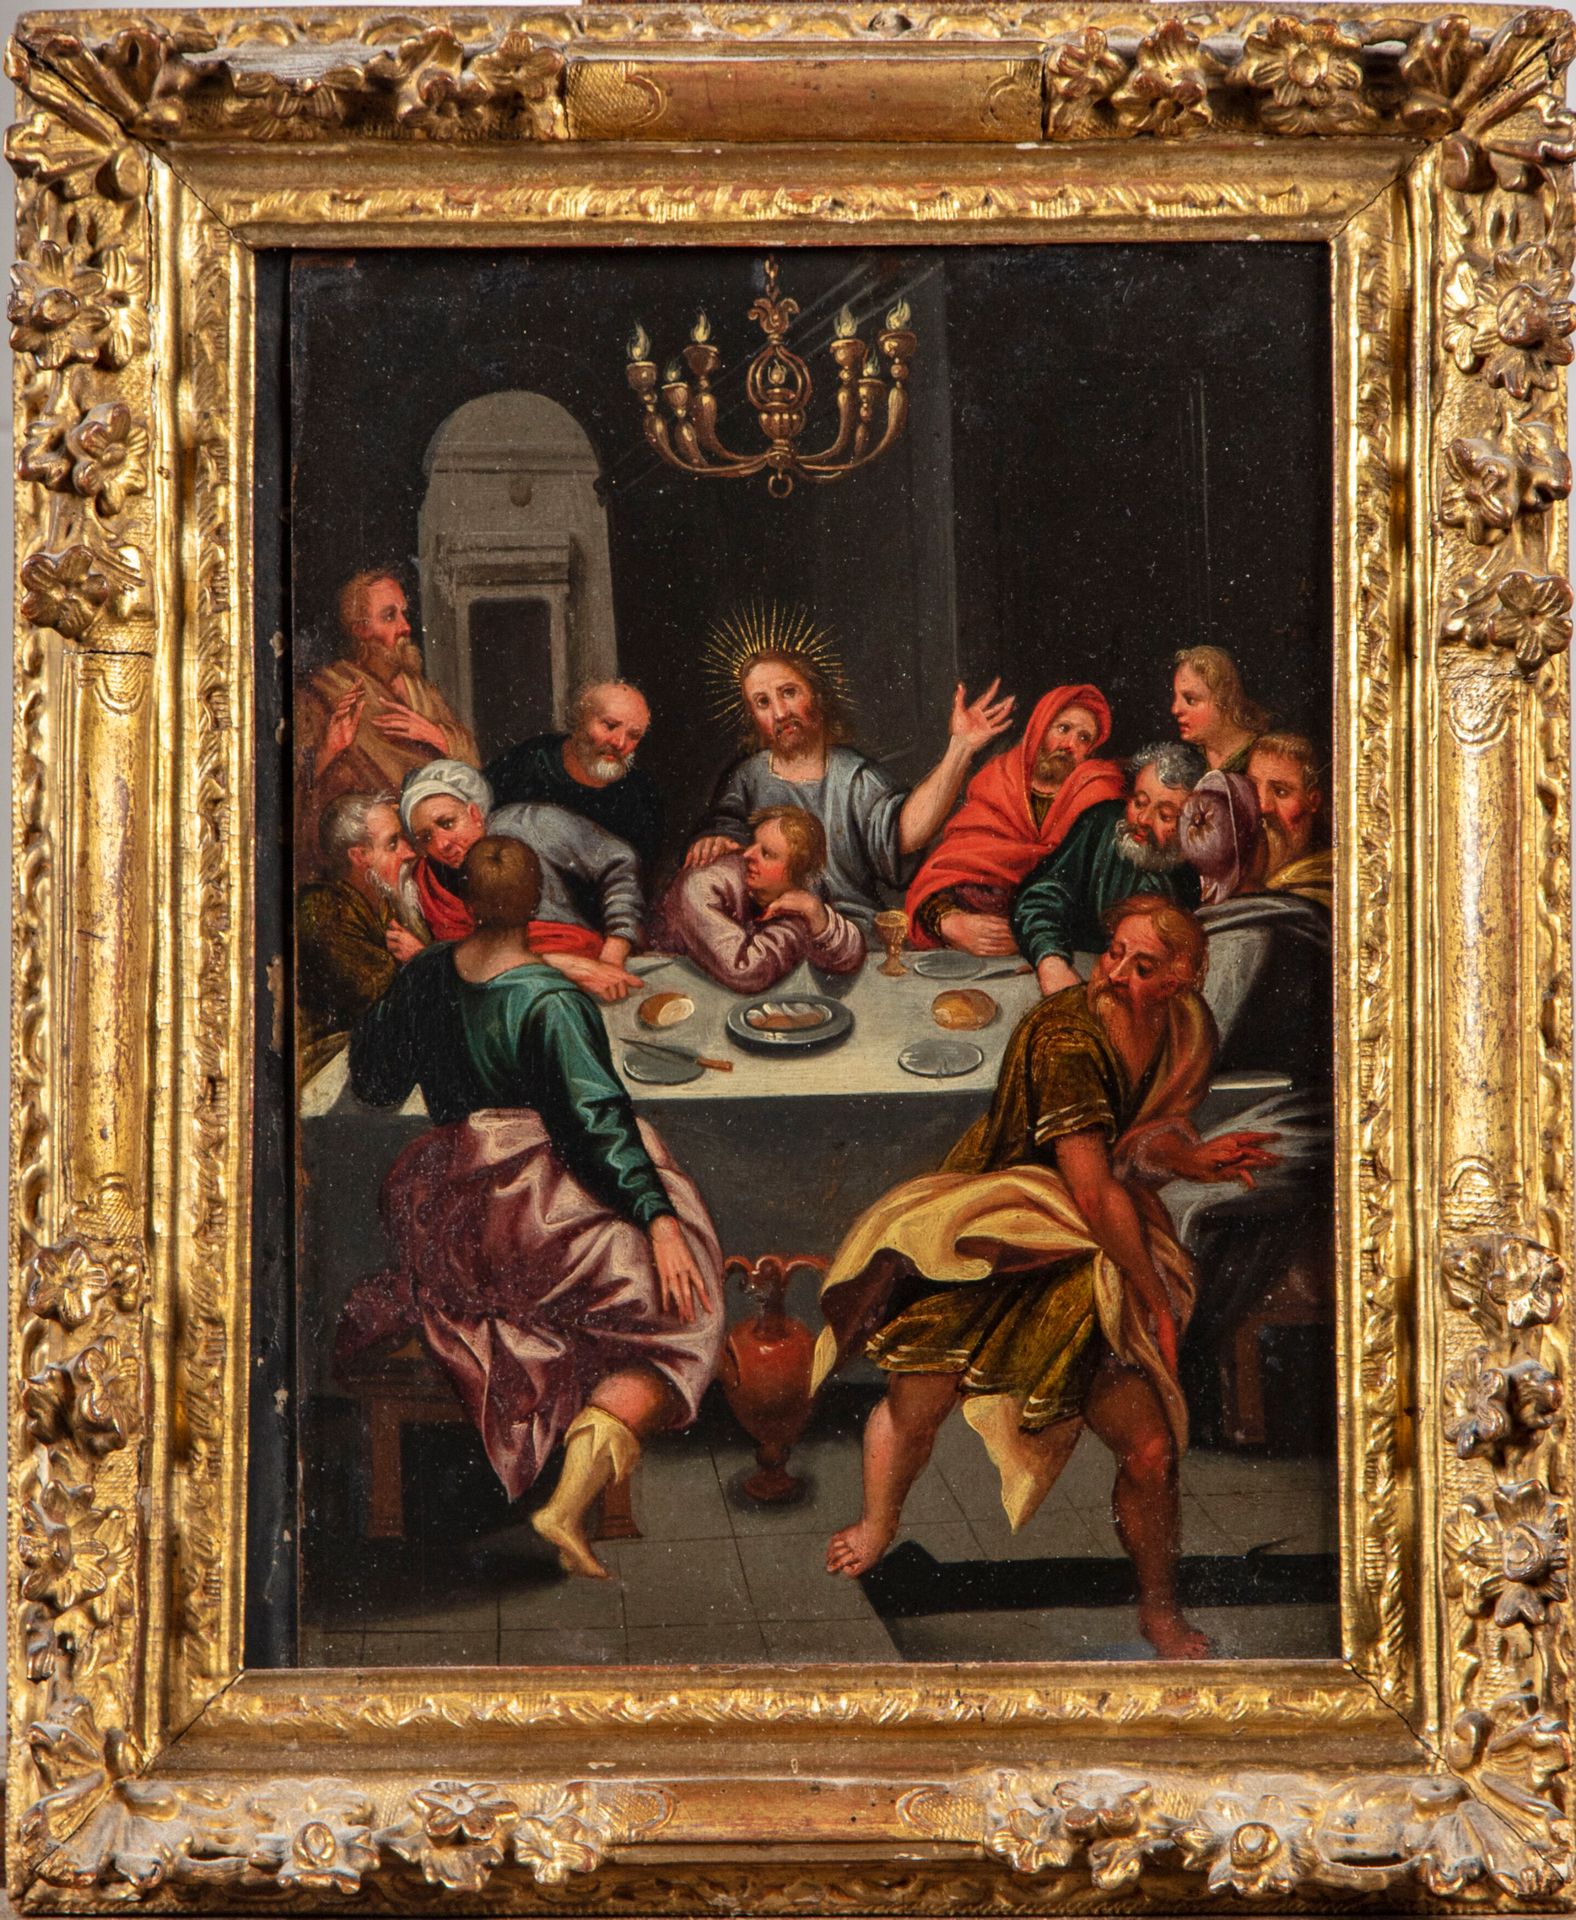 ECOLE FLAMANDE FLEMISH SCHOOL of the 18th century
The Last Supper
Oil on copper
&hellip;